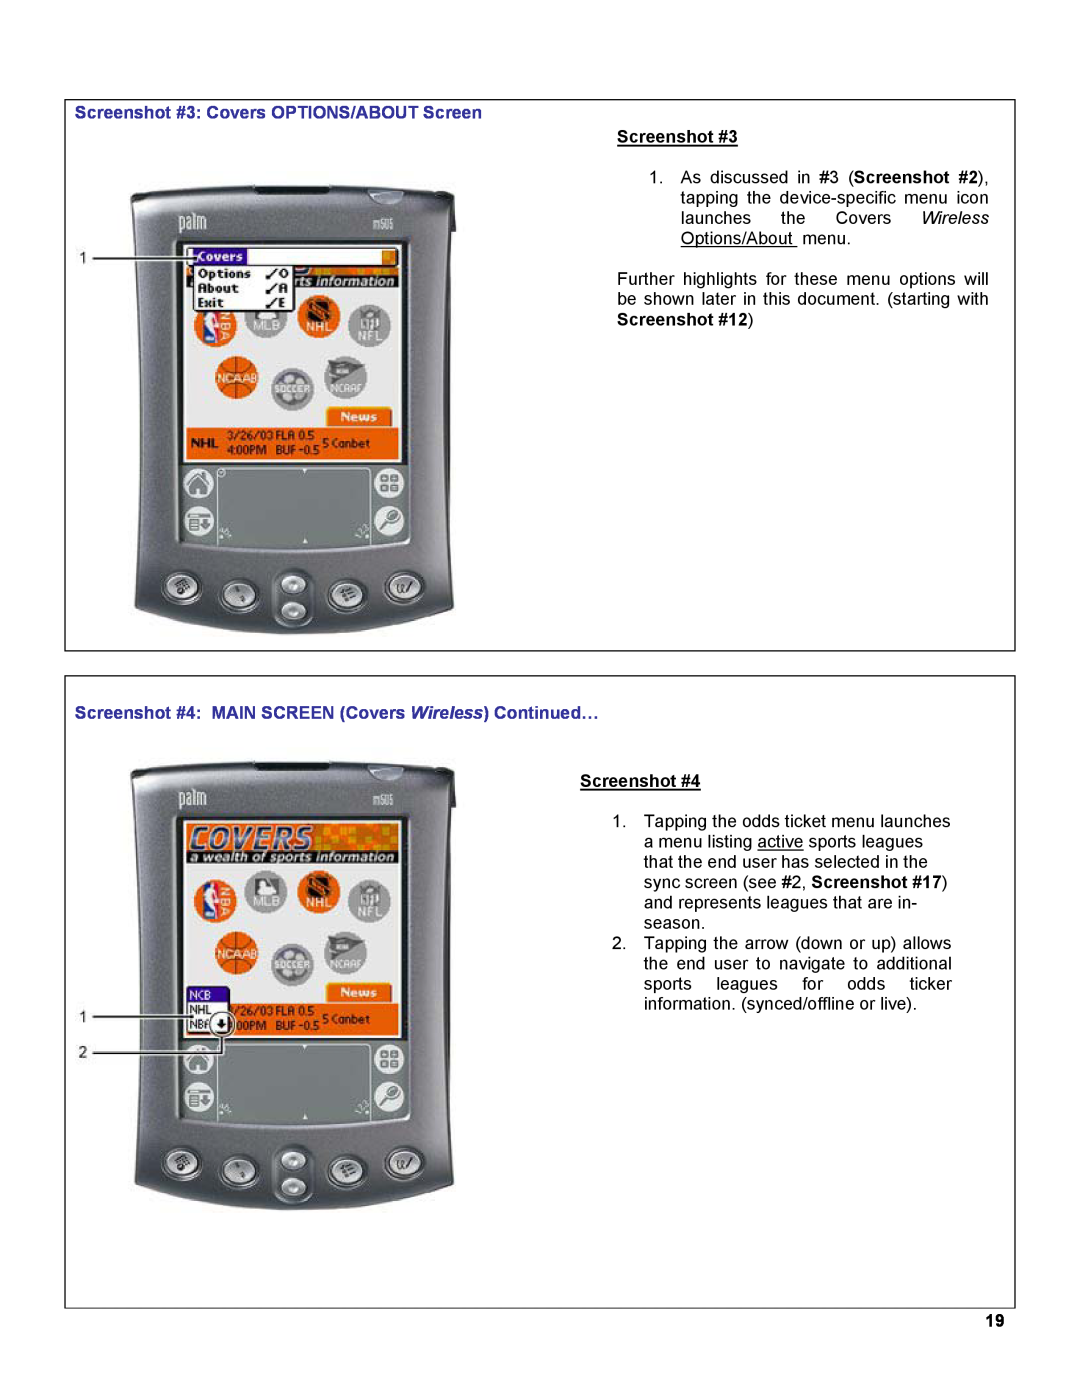 Palm OS Devices manual Screenshot #3 Covers OPTIONS/ABOUT Screen, Screenshot #4 MAIN SCREEN Covers Wireless Continued… 